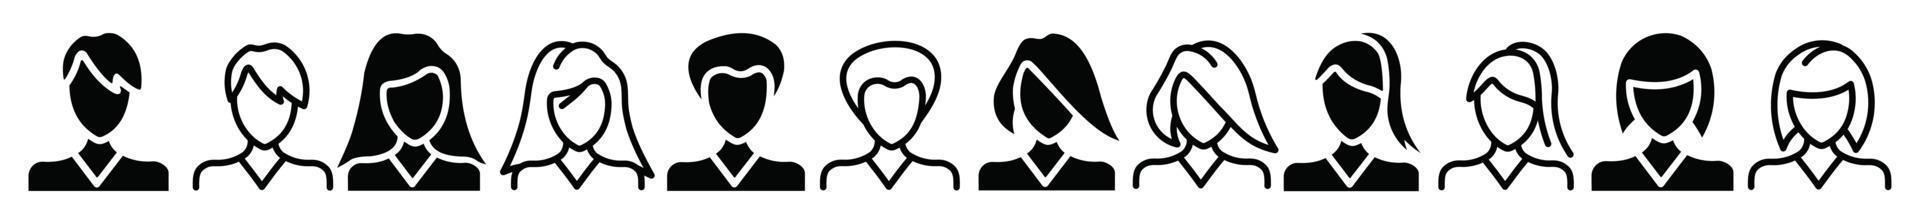 People avatar icon set,Vector flat  icon as female vector